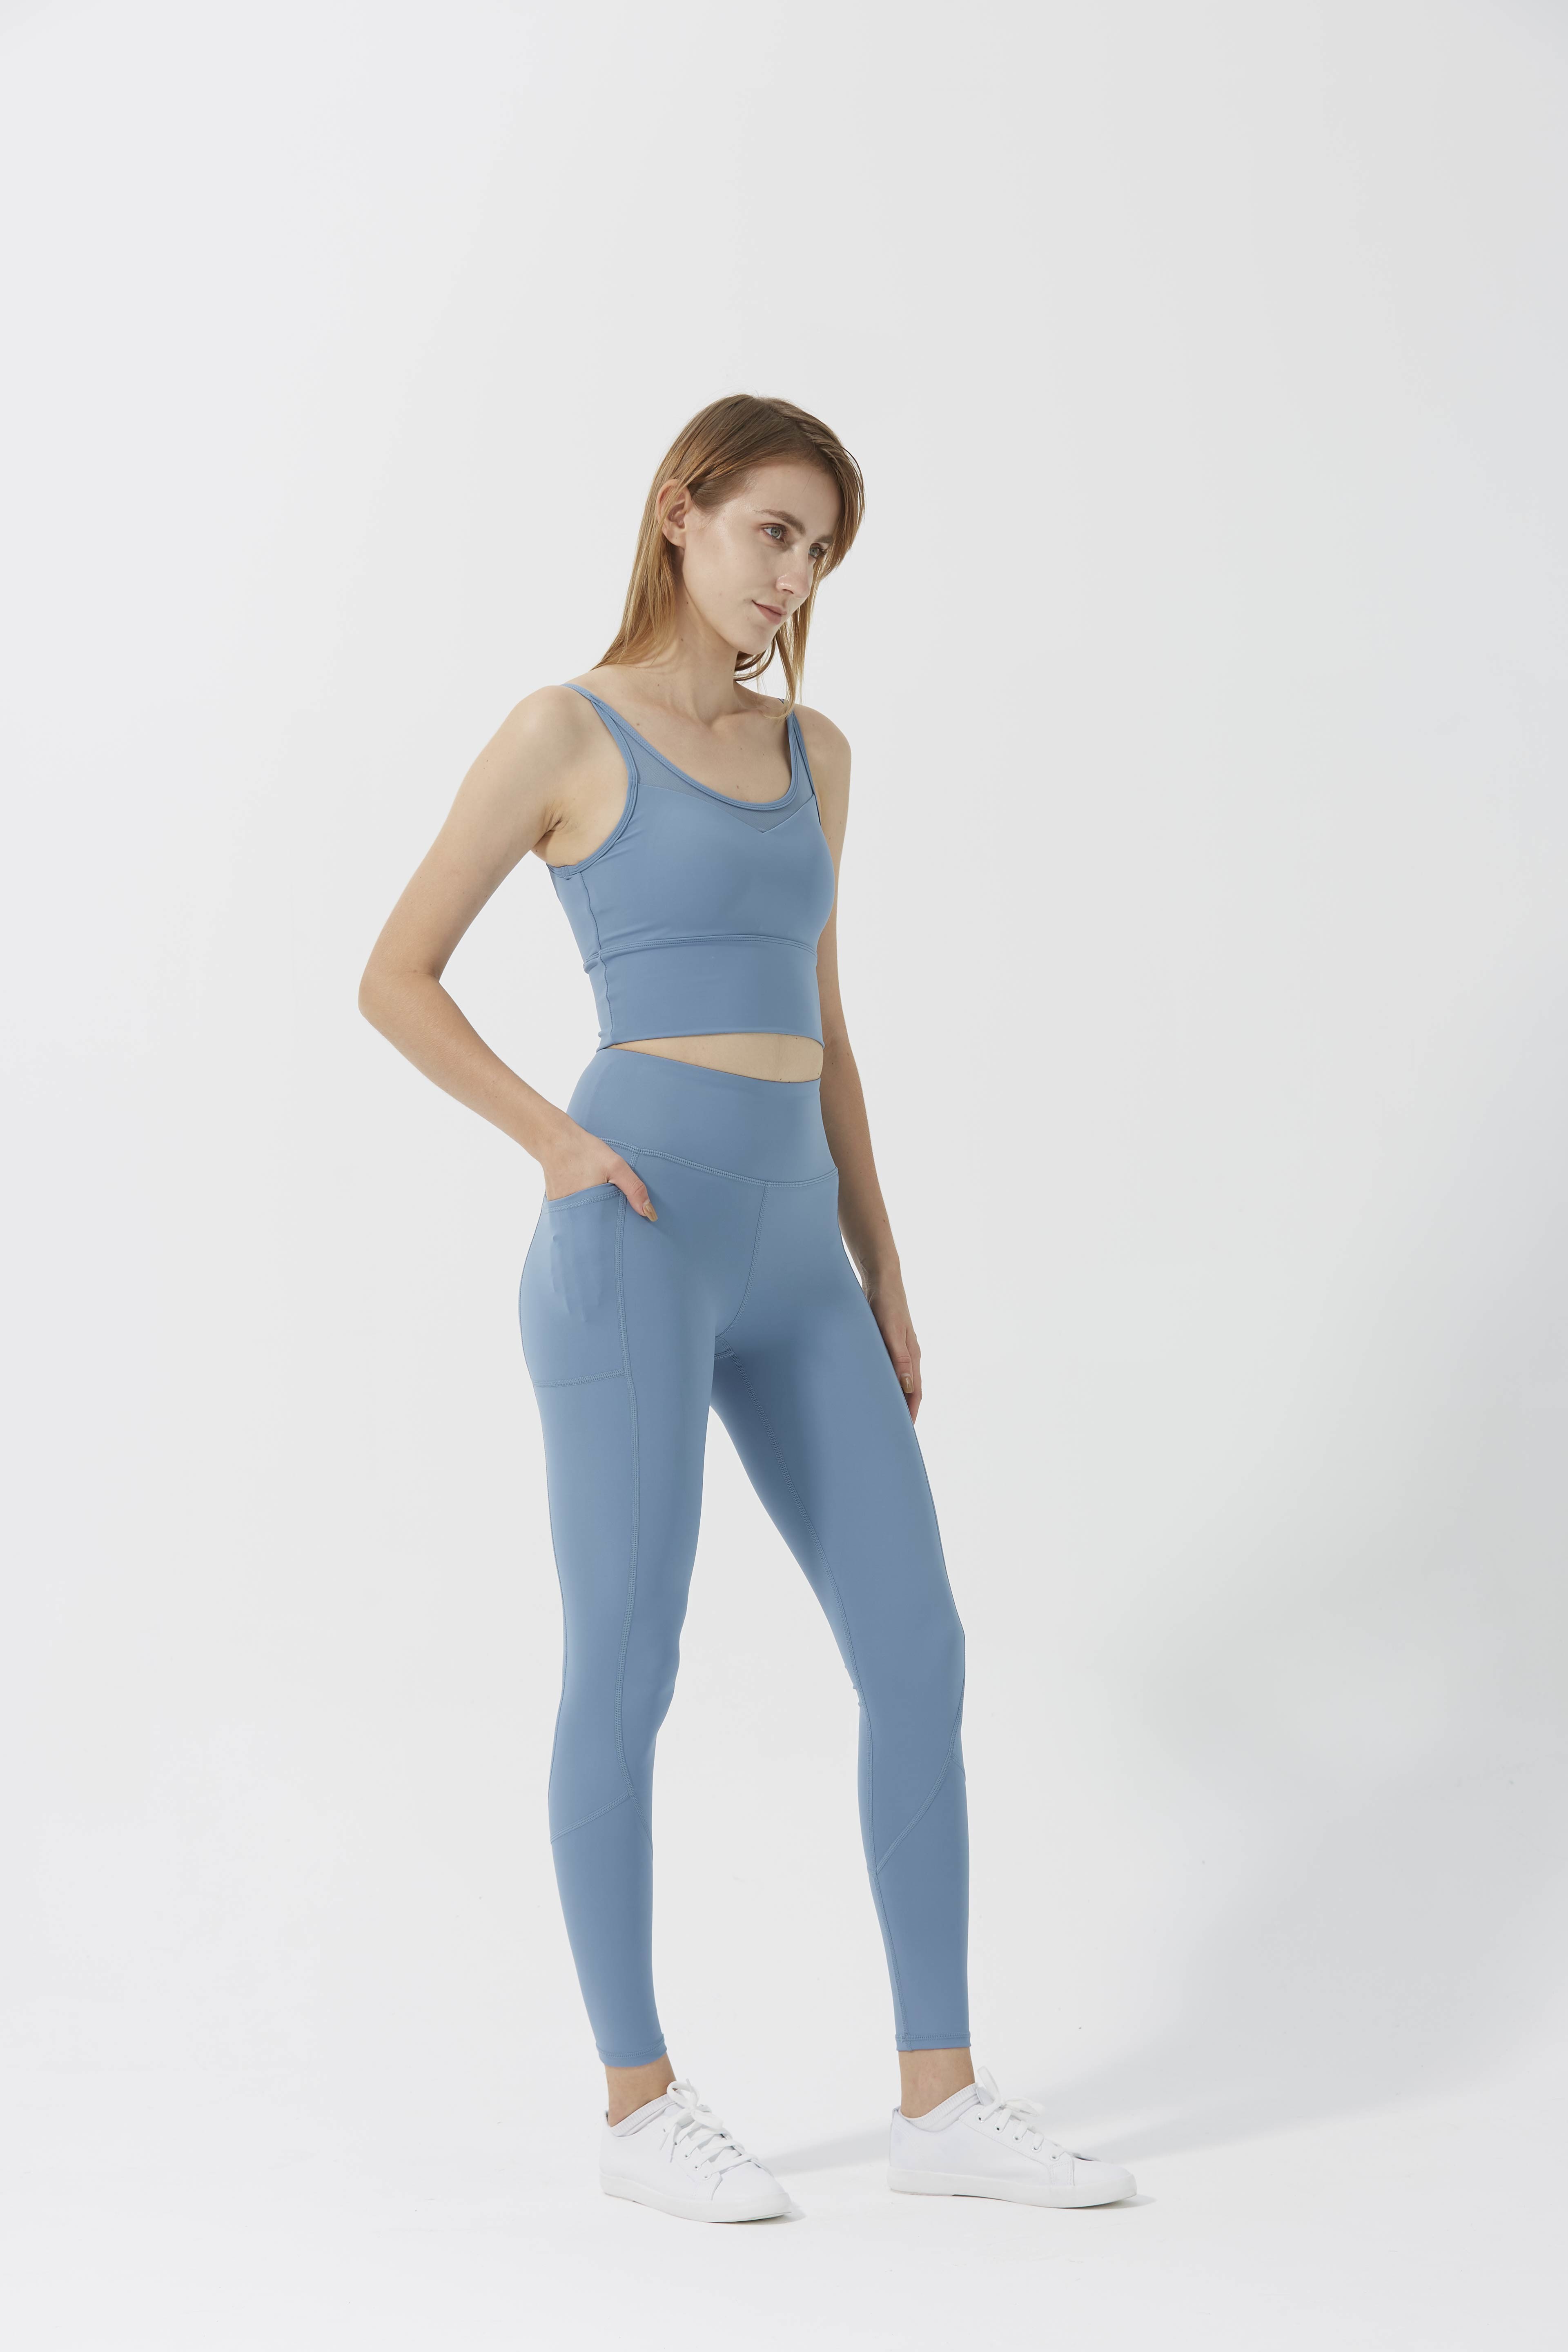  Ladies High Waist Seamless Fitness Running Yoga Pants Support Dropshipping Manufactures